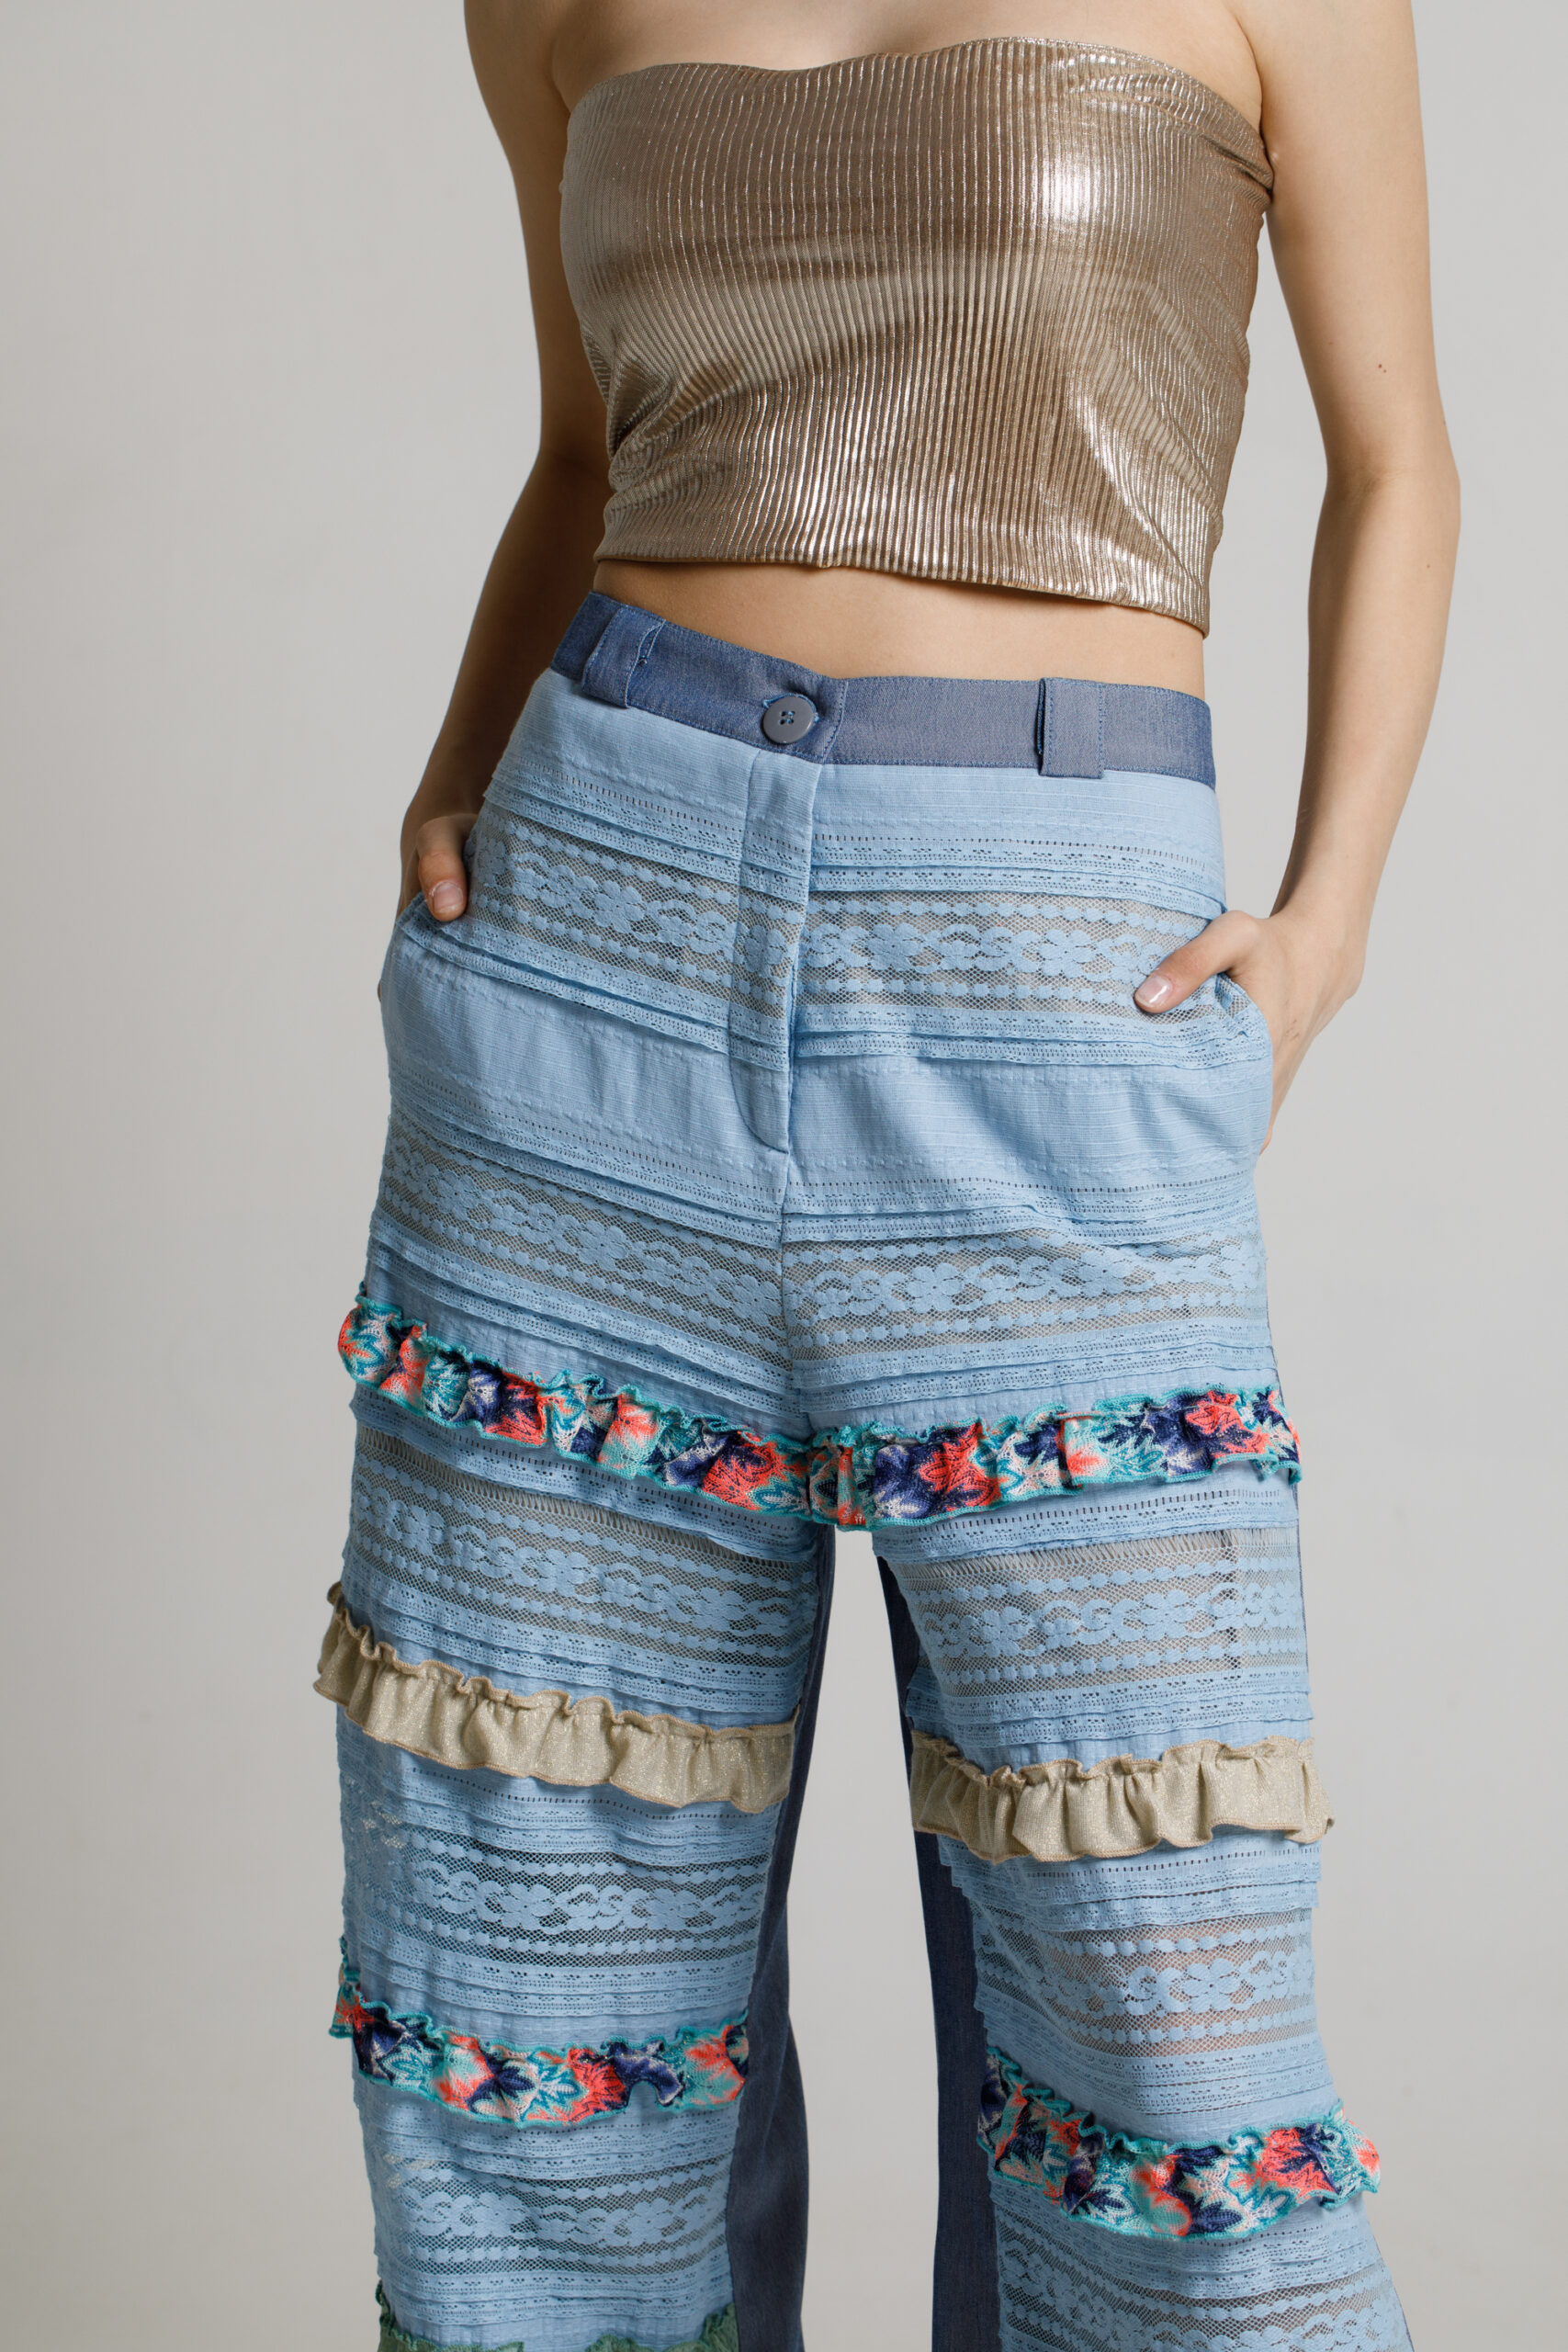 OPAL jeans and lace pants. Natural fabrics, original design, handmade embroidery